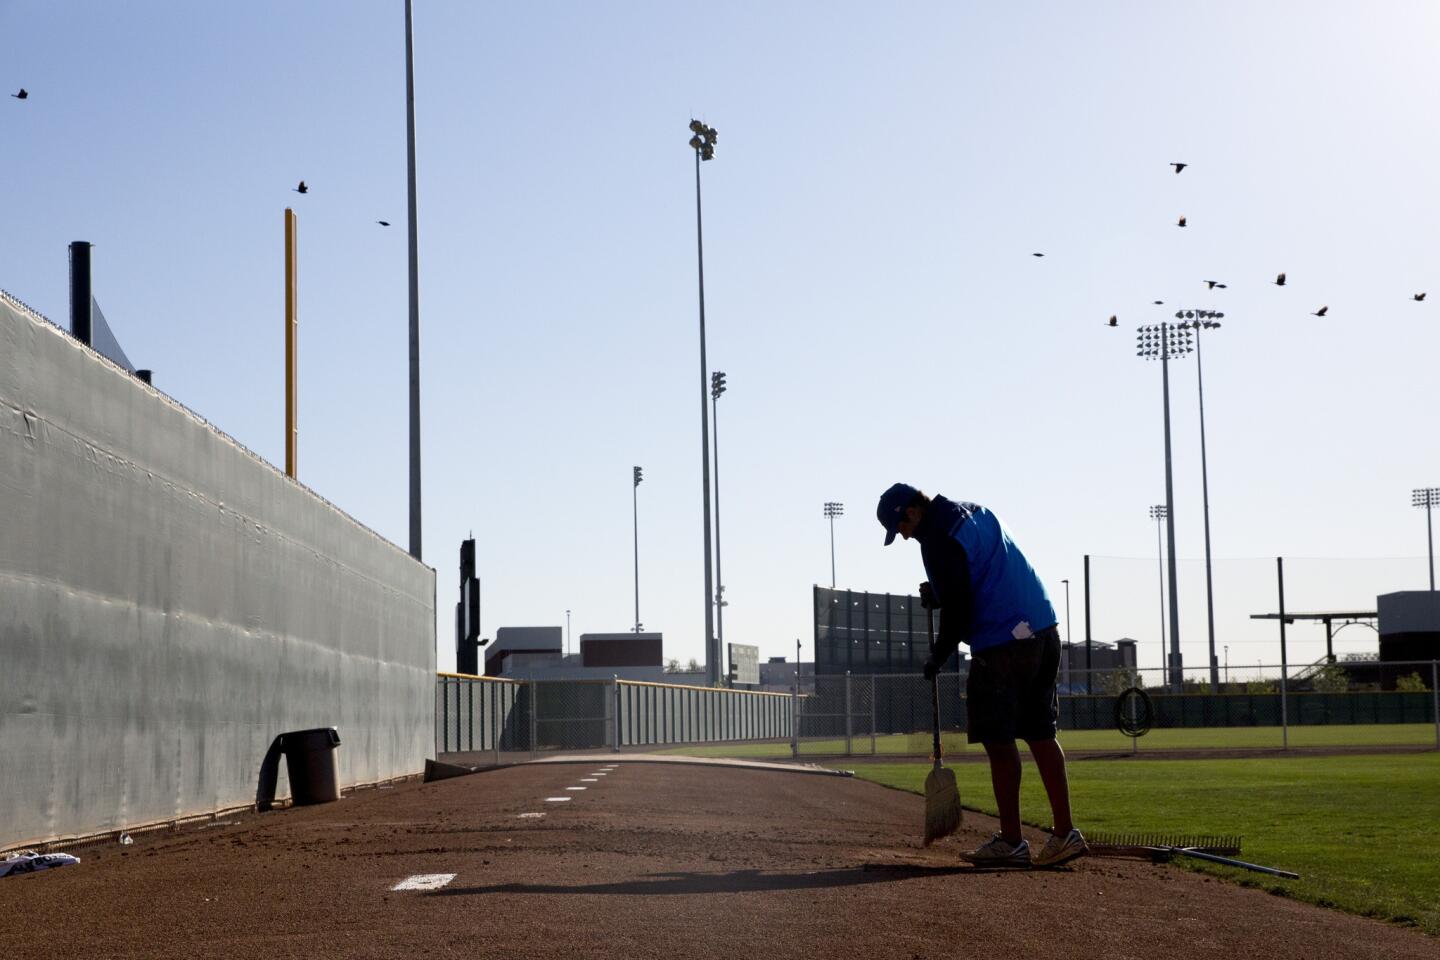 Matt Ramirez cleans the pitching mounds during spring training at Sloan Park Friday, Feb. 26, 2016, in Mesa, Ariz.